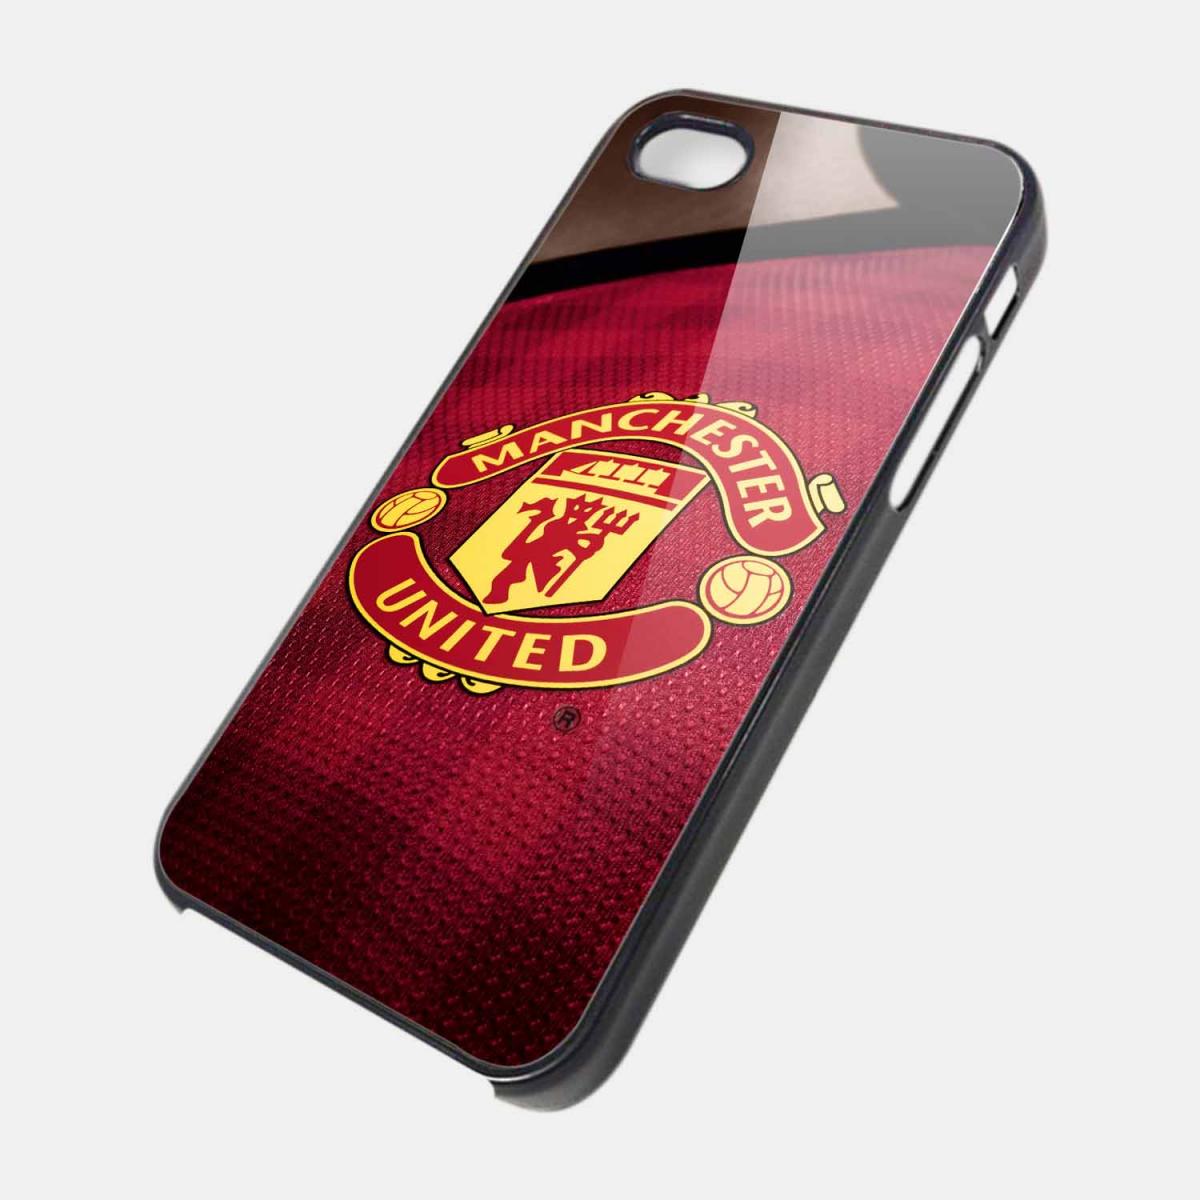 Manchester United Fa Special Design Iphone 4 Case Cover